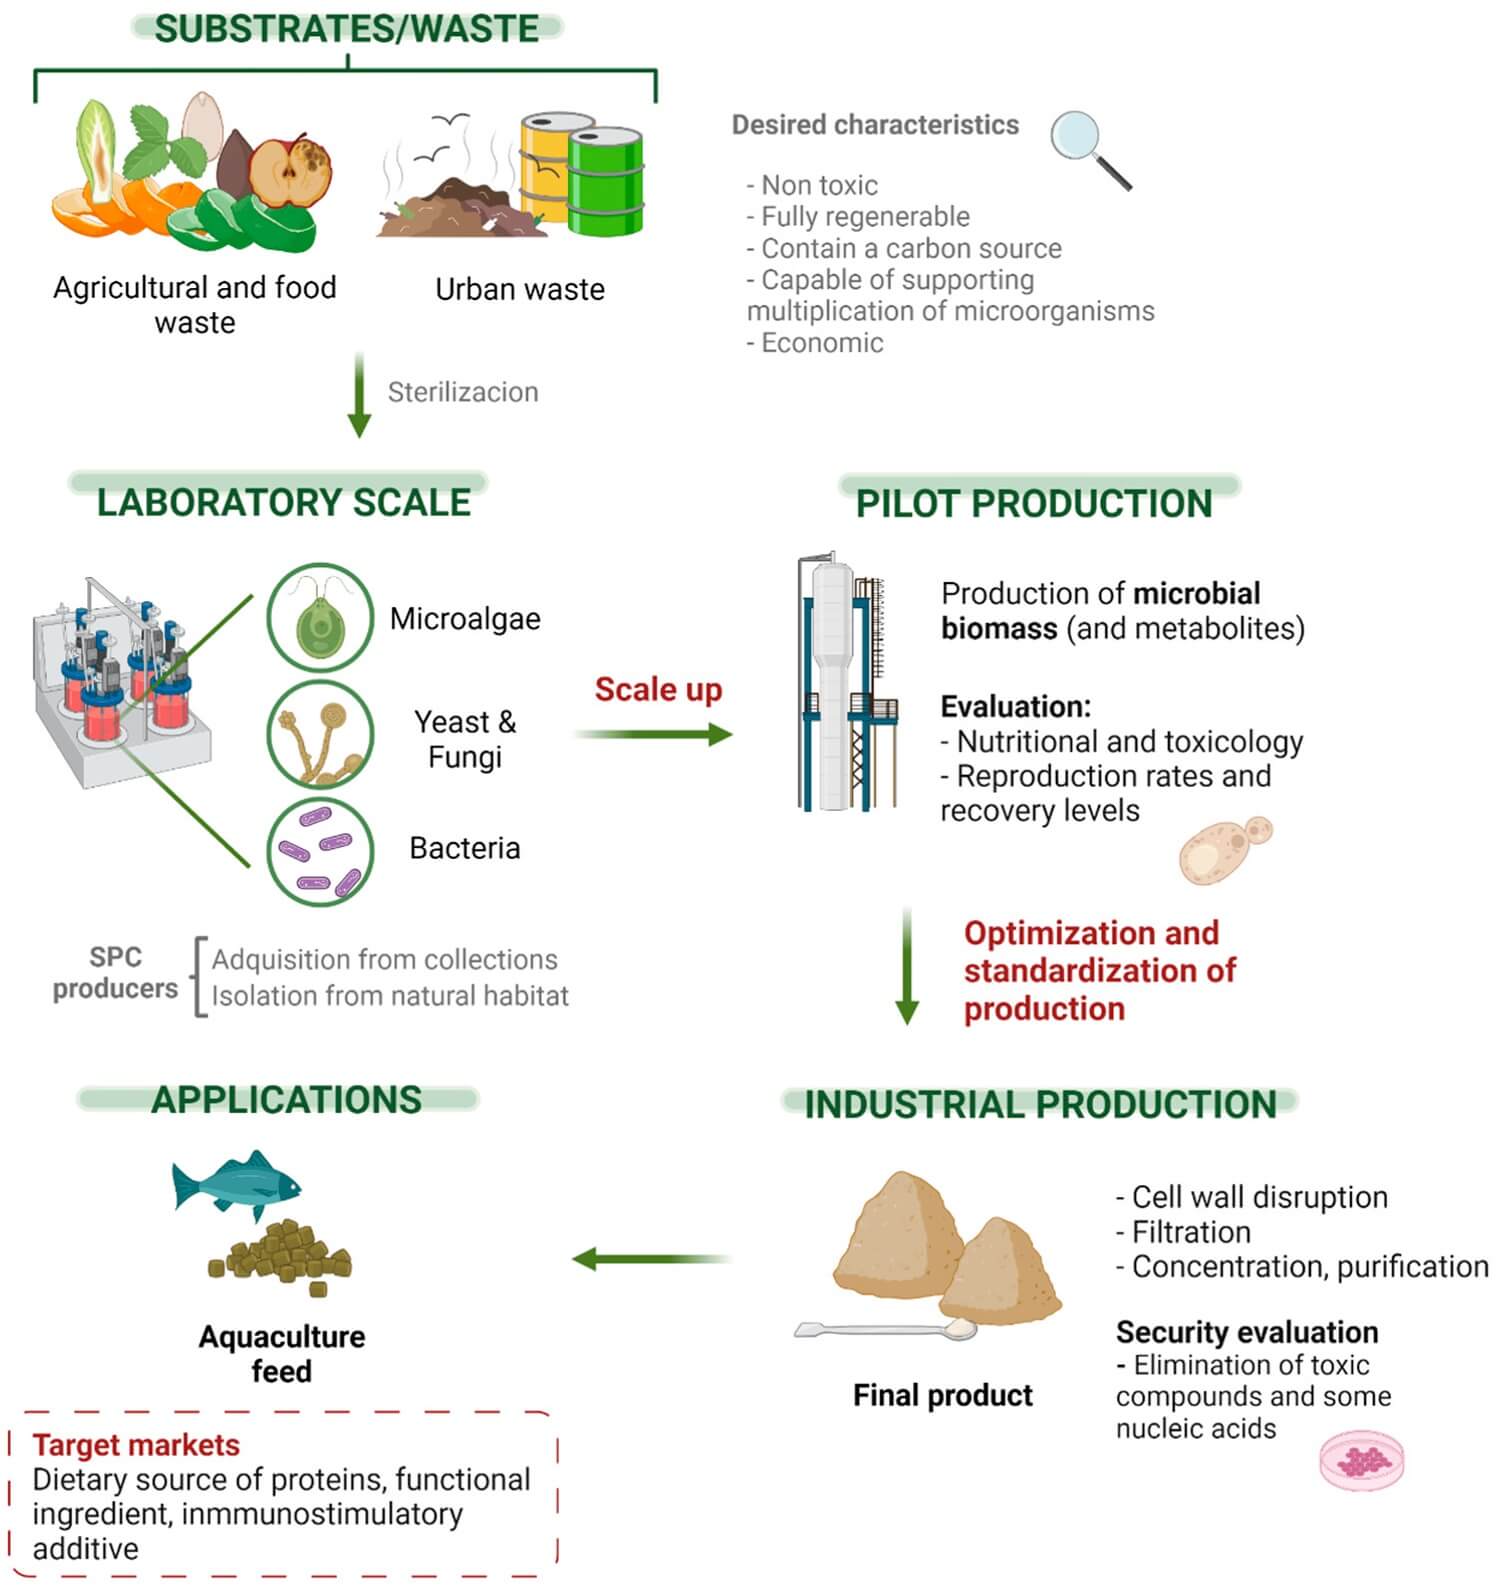 Optimal single-cell protein (SCP) production processes, integrating circular economy approaches.